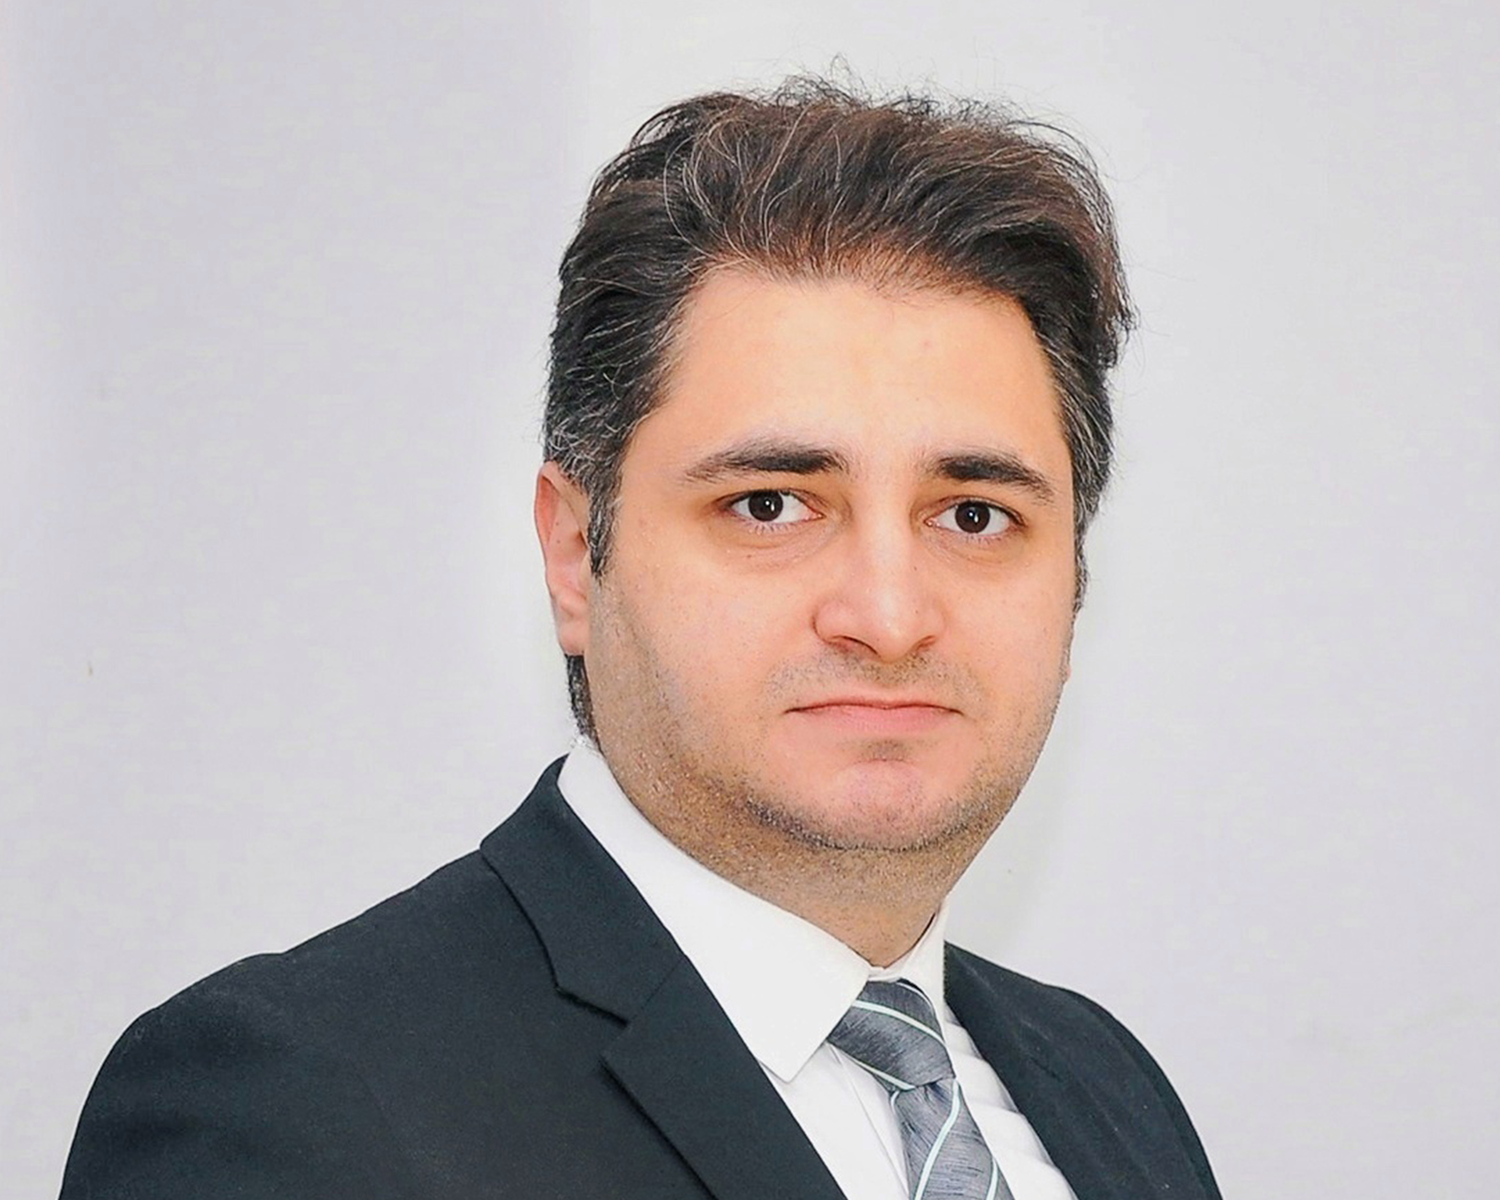 Araz Ismayilov, Senior Lawyer at Turan Legal, excels in corporate, commercial, labor law. Qafqaz and Selchuk Uni grad with 7+ years experience. Trusted for strategic counsel, deep legal insights. Proficient in Azerbaijani, English, Turkish for client communication.